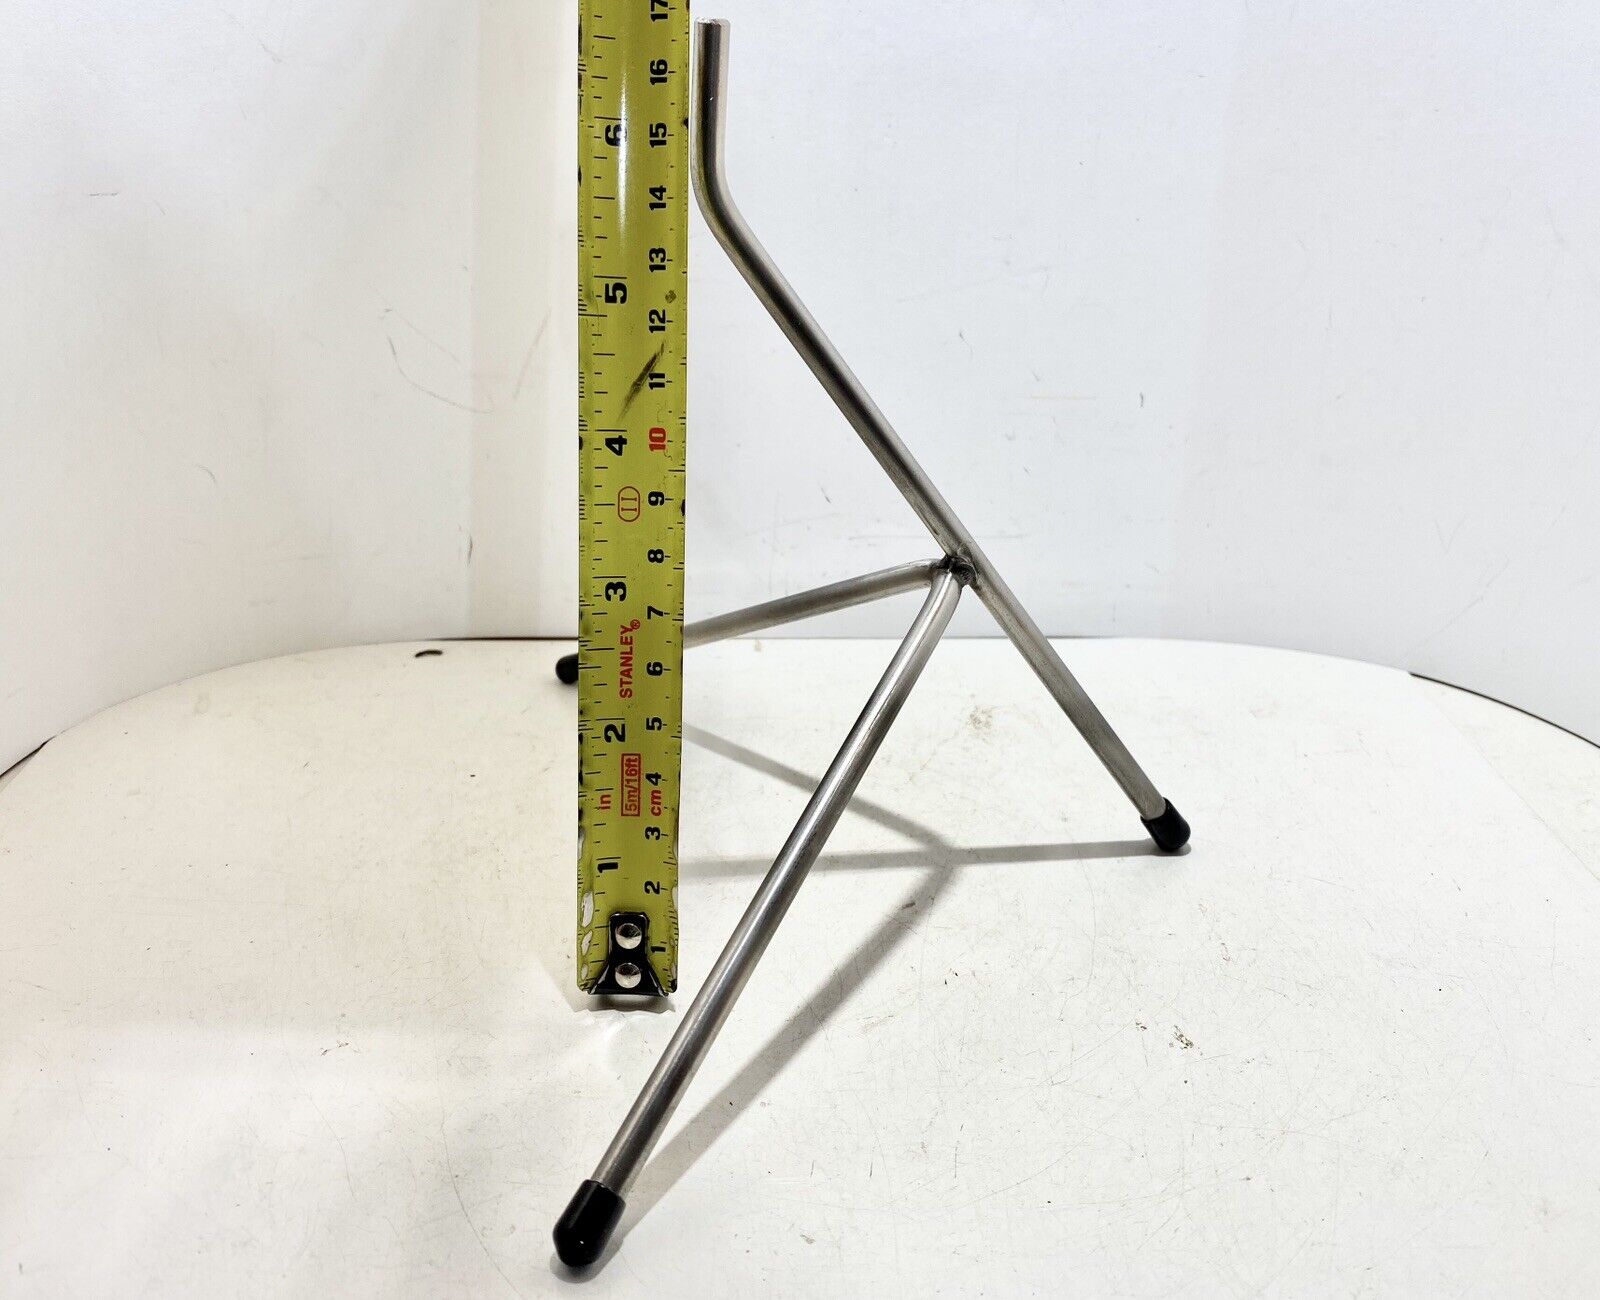 Aircraft Desk display model Stainless Steel Tripod stand 6.5”